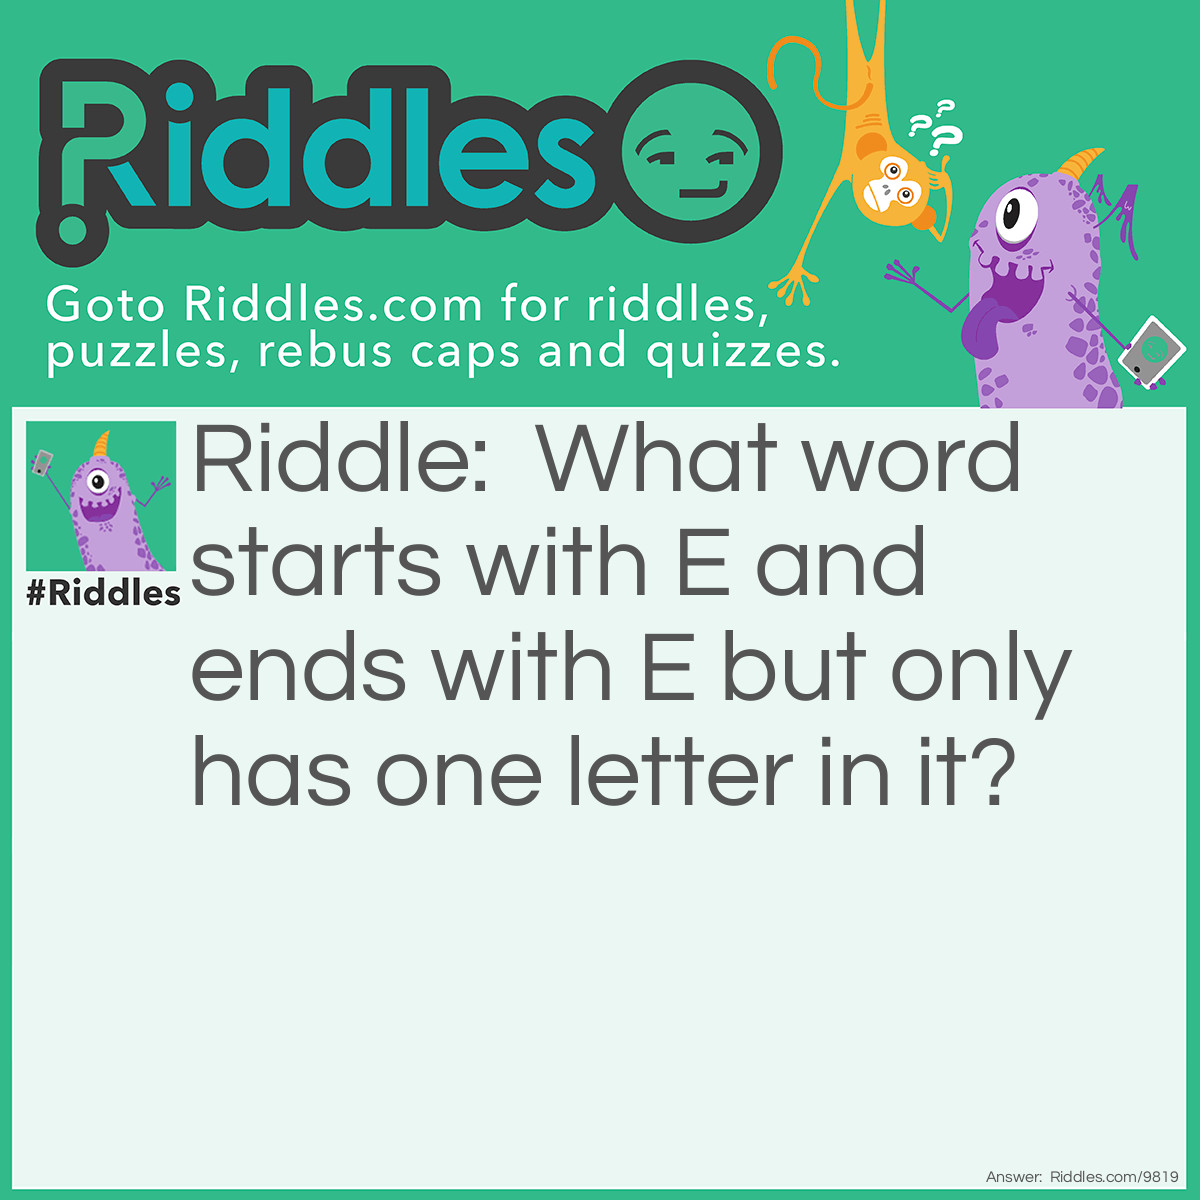 Riddle: What word starts with E and ends with E but only has one letter in it? Answer: An envelope.